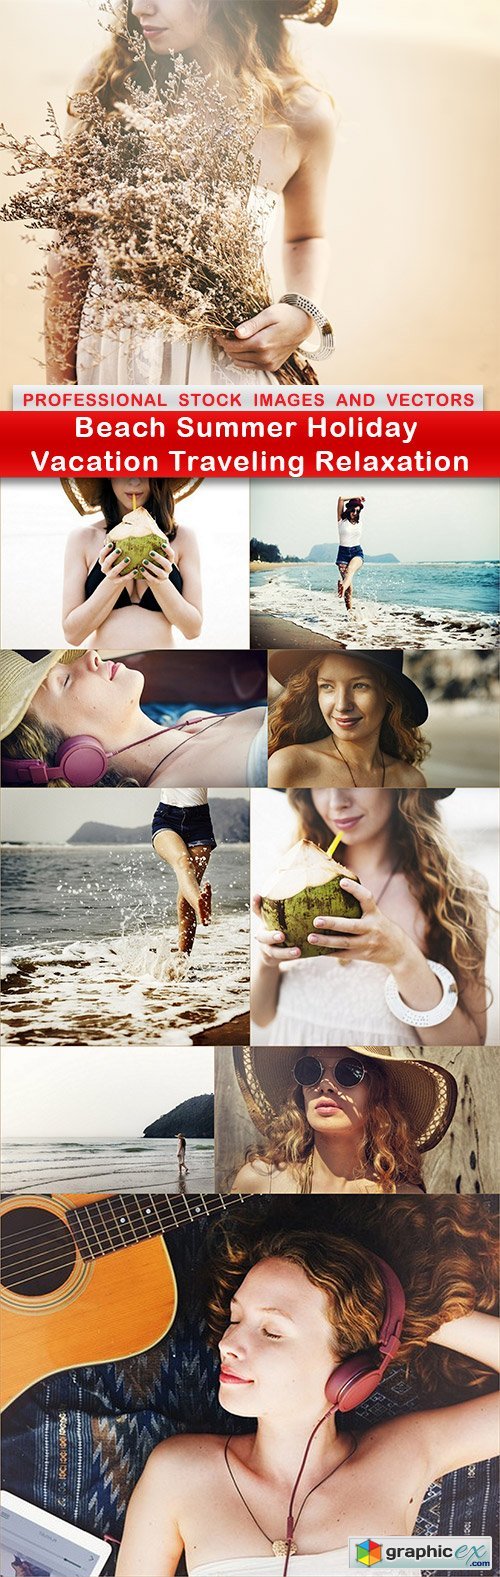 Beach Summer Holiday Vacation Traveling Relaxation - 10 UHQ JPEG